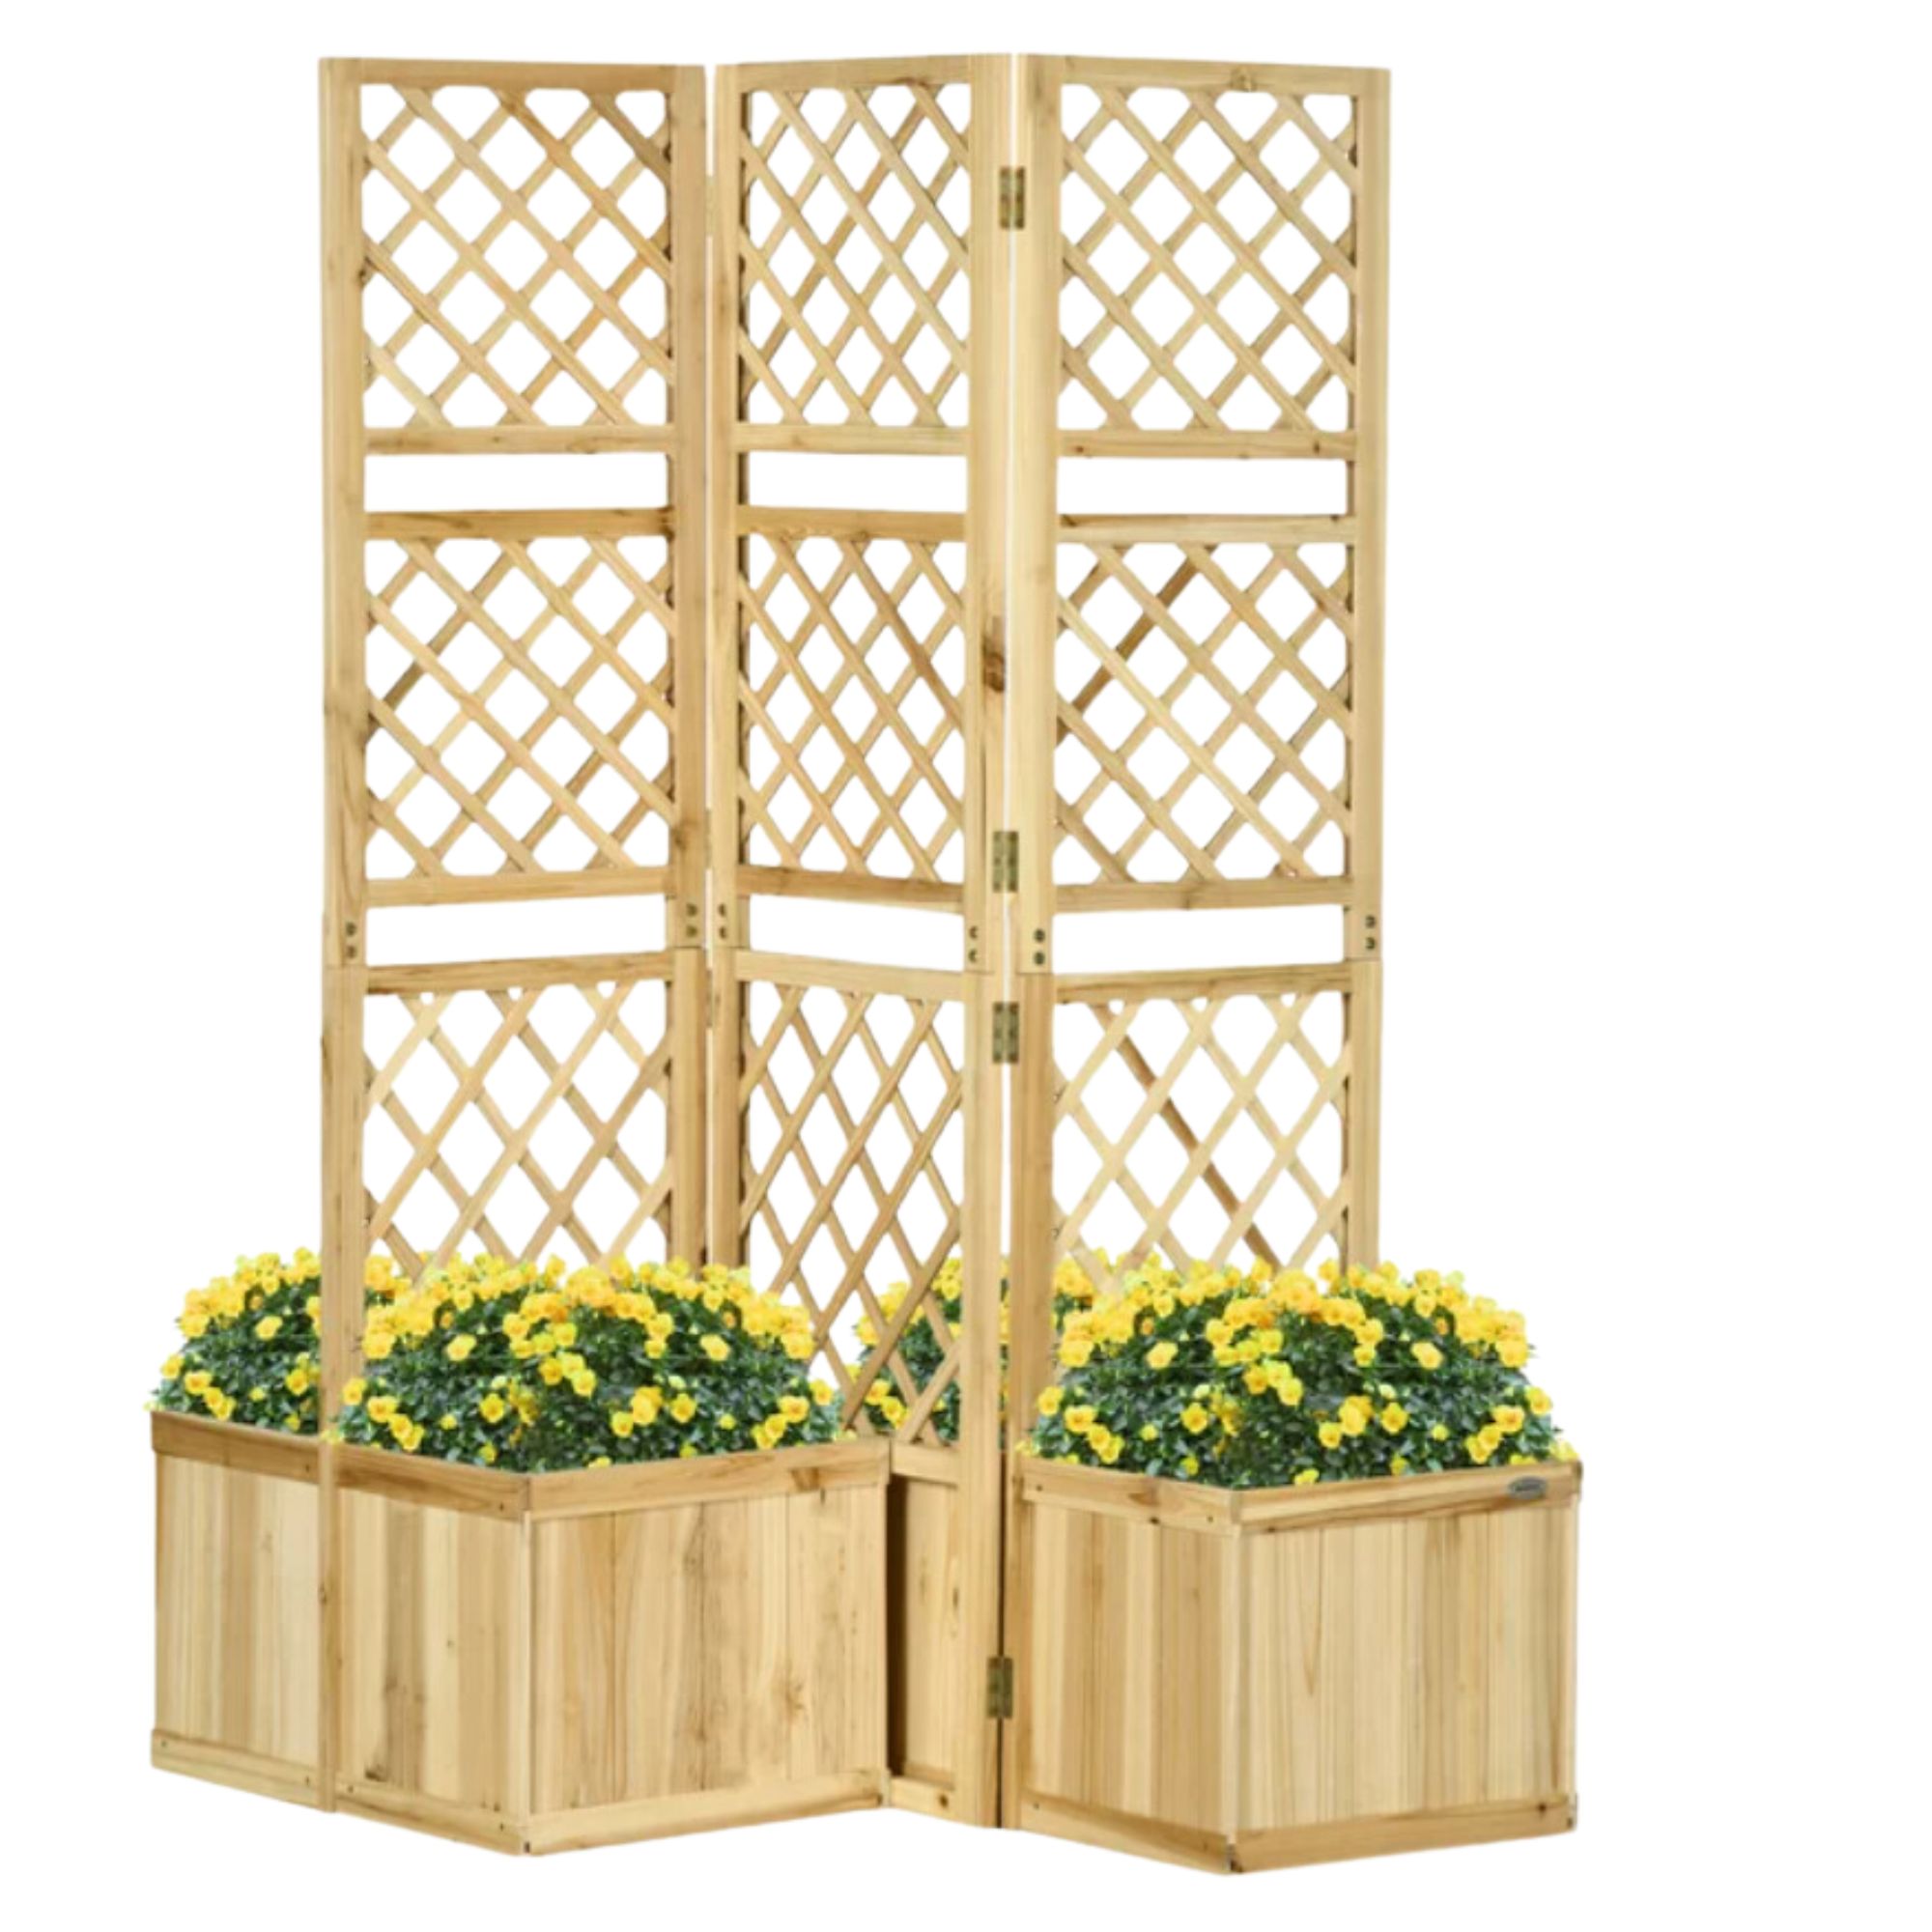 Outsunny Freestanding Outdoor Privacy Screen